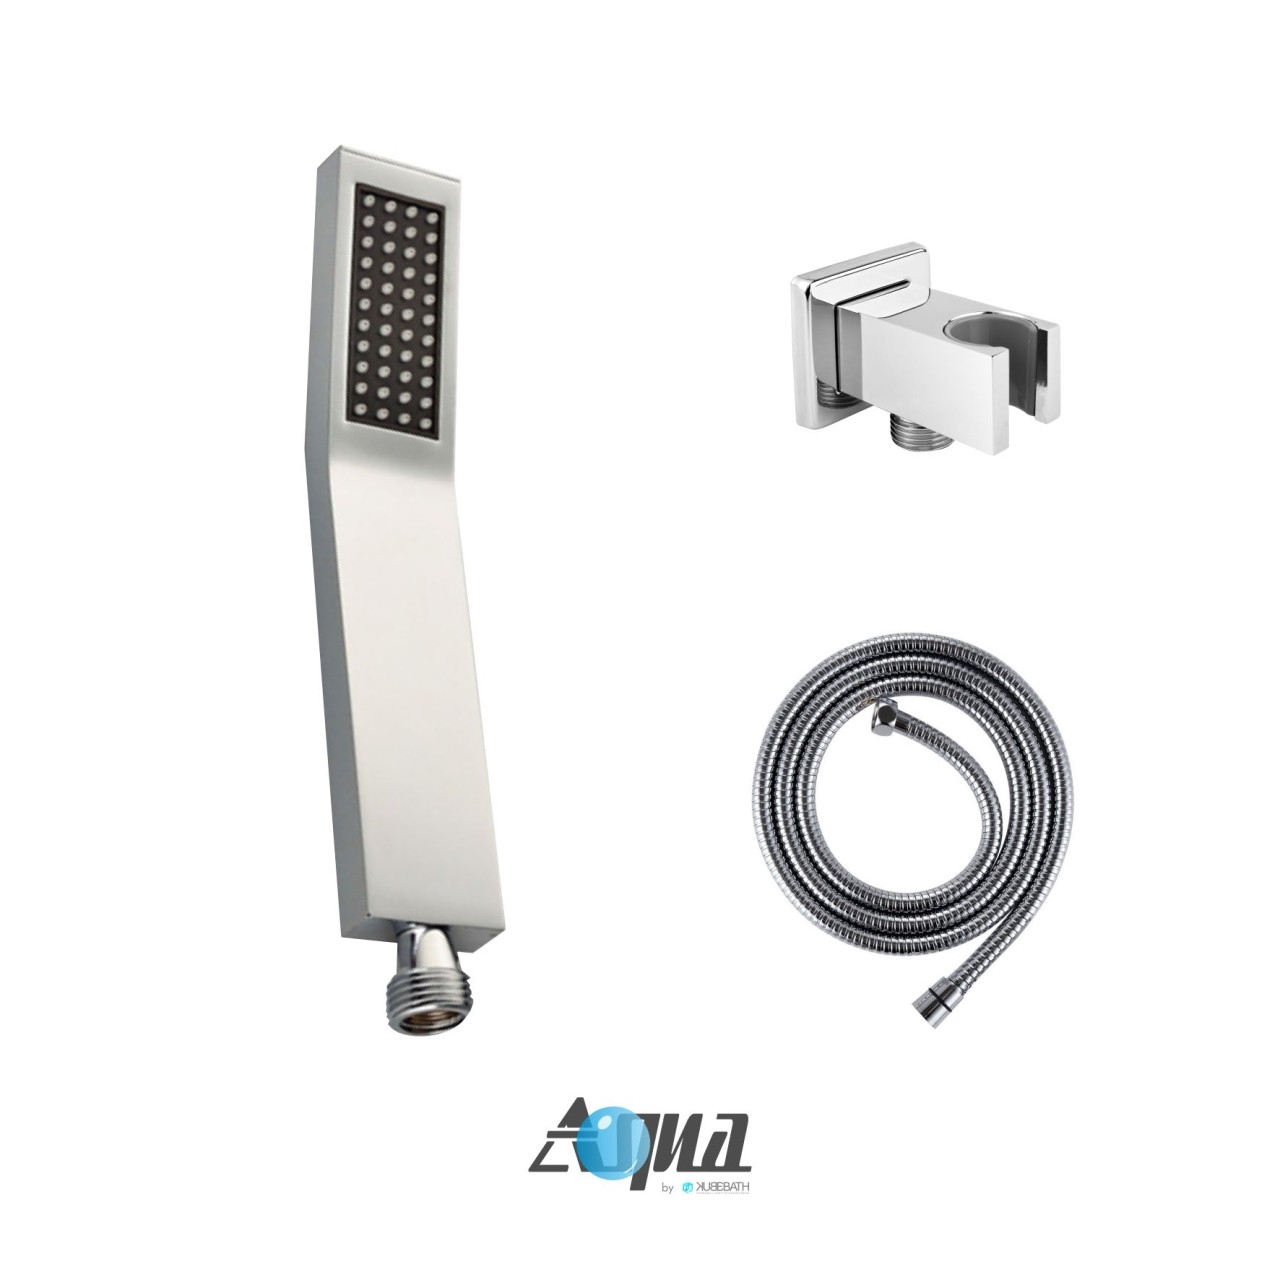 Aqua Piazza Brass Shower Set with 8" Square Rain Shower, Tub Filler and Handheld